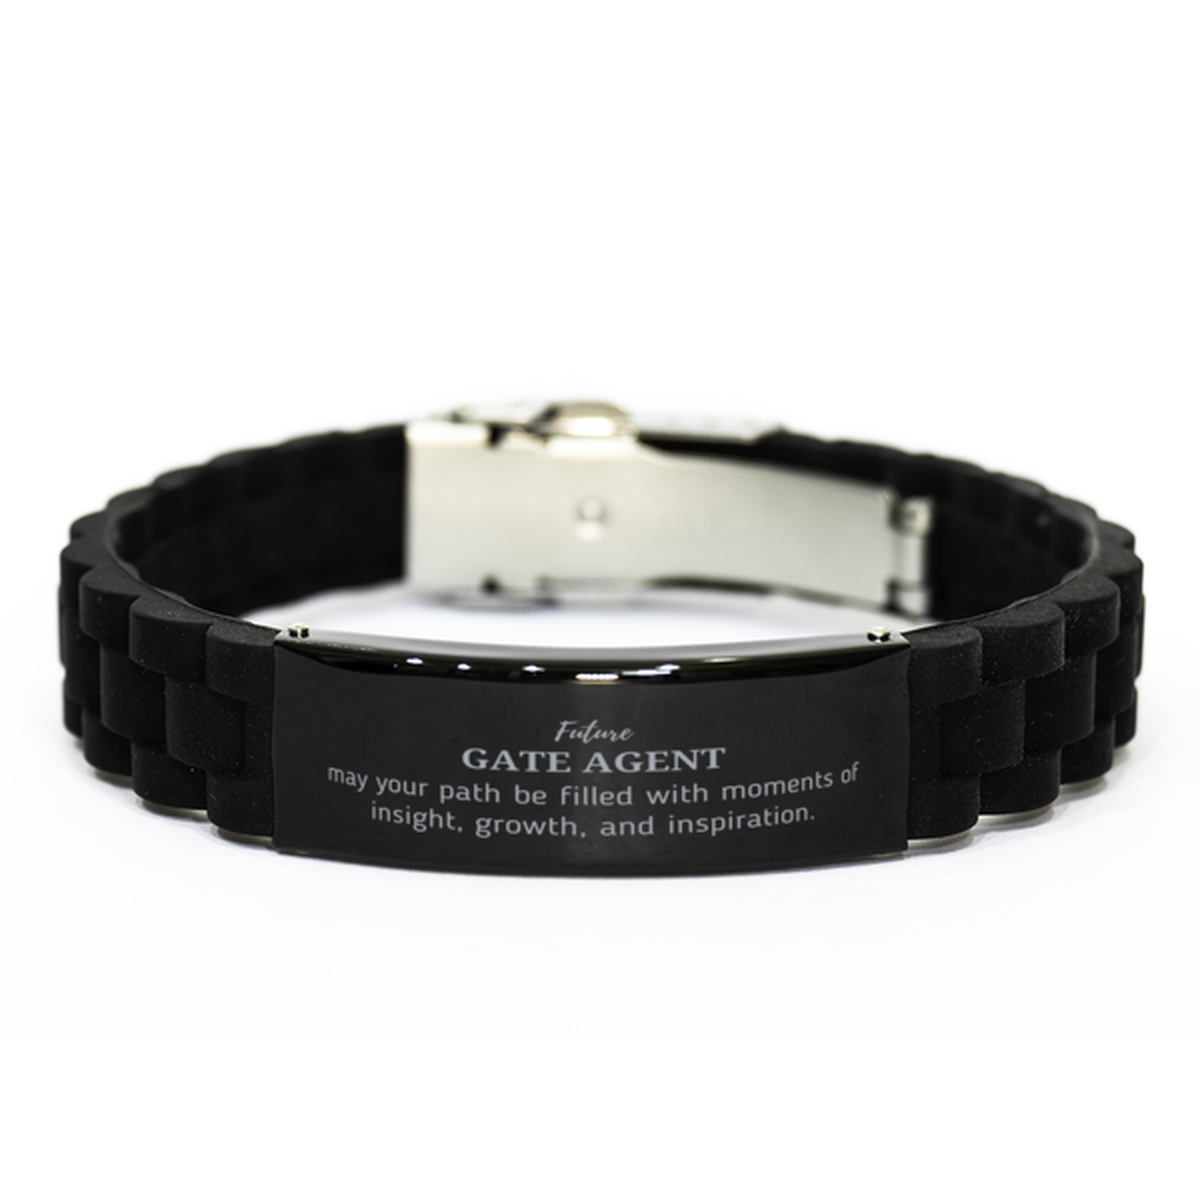 Future Gate Agent Gifts, May your path be filled with moments of insight, Graduation Gifts for New Gate Agent, Christmas Unique Black Glidelock Clasp Bracelet For Men, Women, Friends